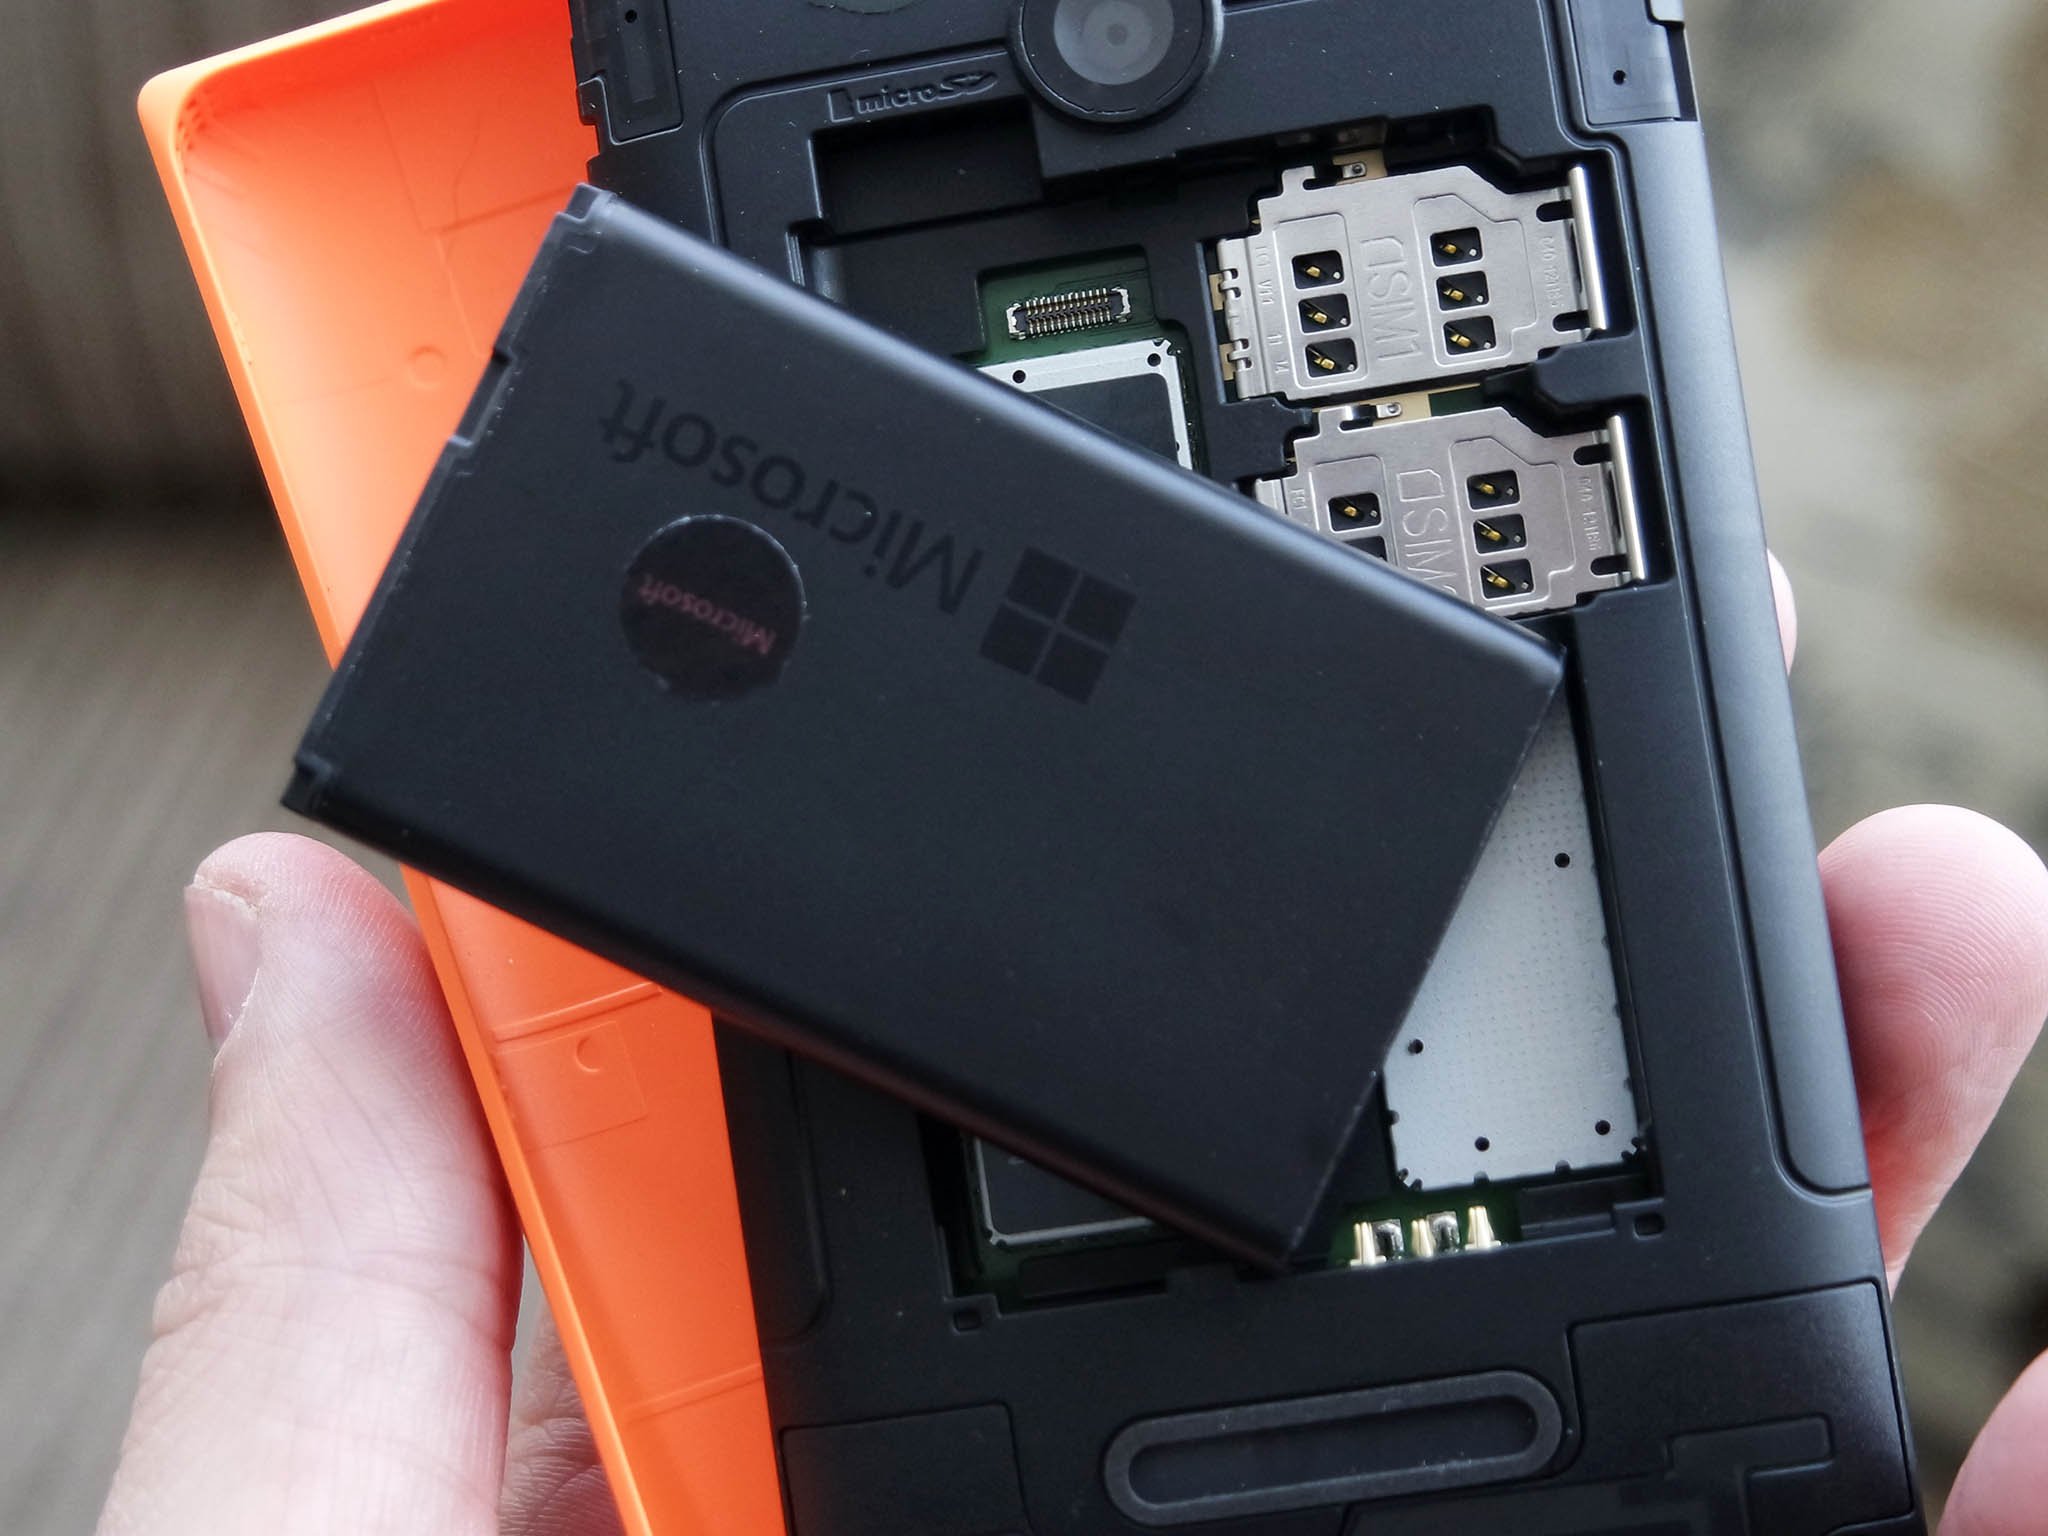 http://www.windowscentral.com/sites/wpcentral.com/files/styles/large_wm_brw/public/field/image/2015/02/lumia-435-battery.jpg?itok=qWFW1wUS